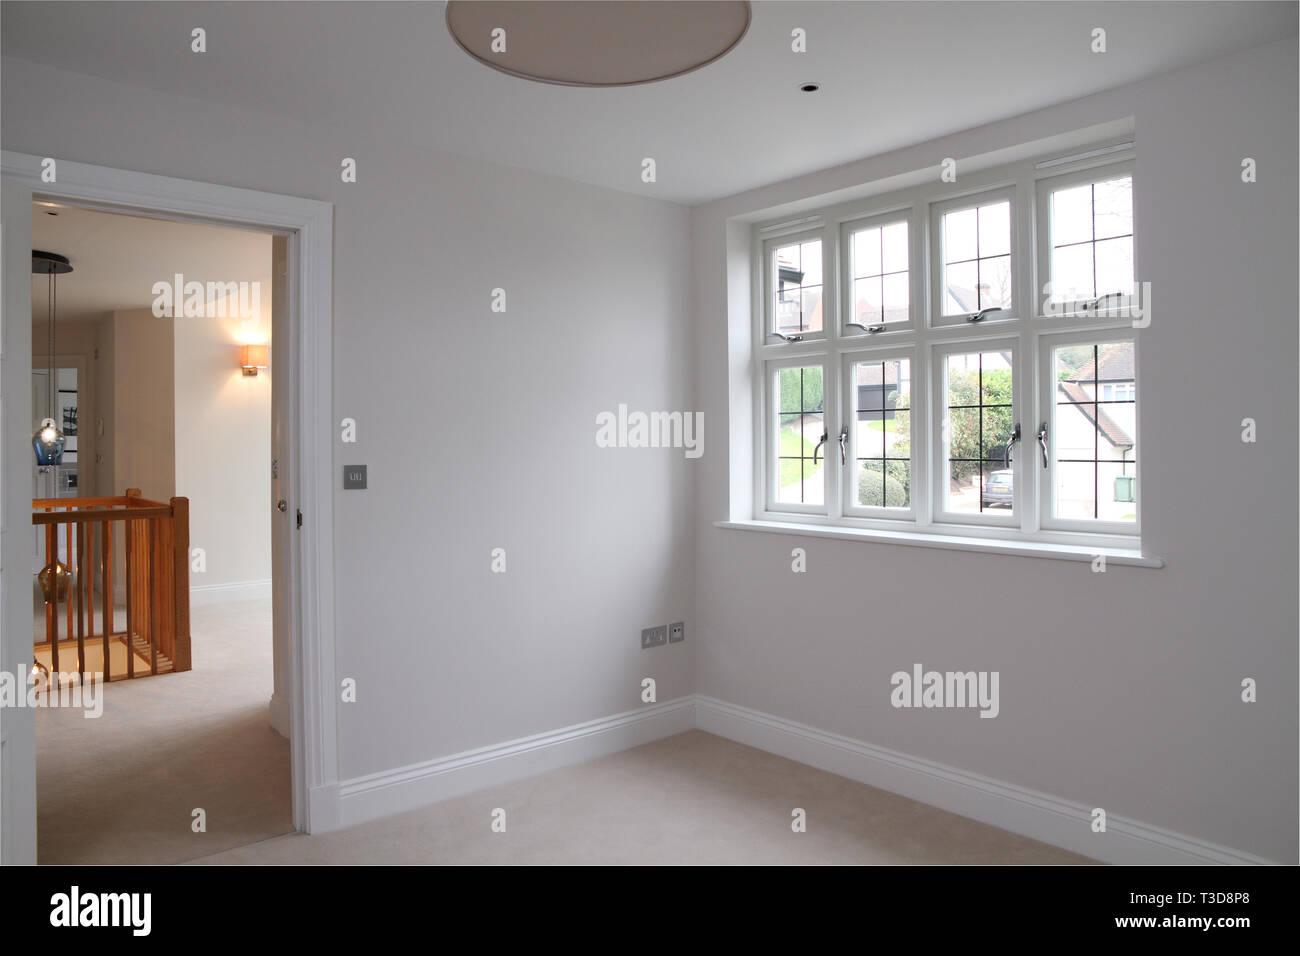 Lomax+Wood six sectioned opening window Stock Photo